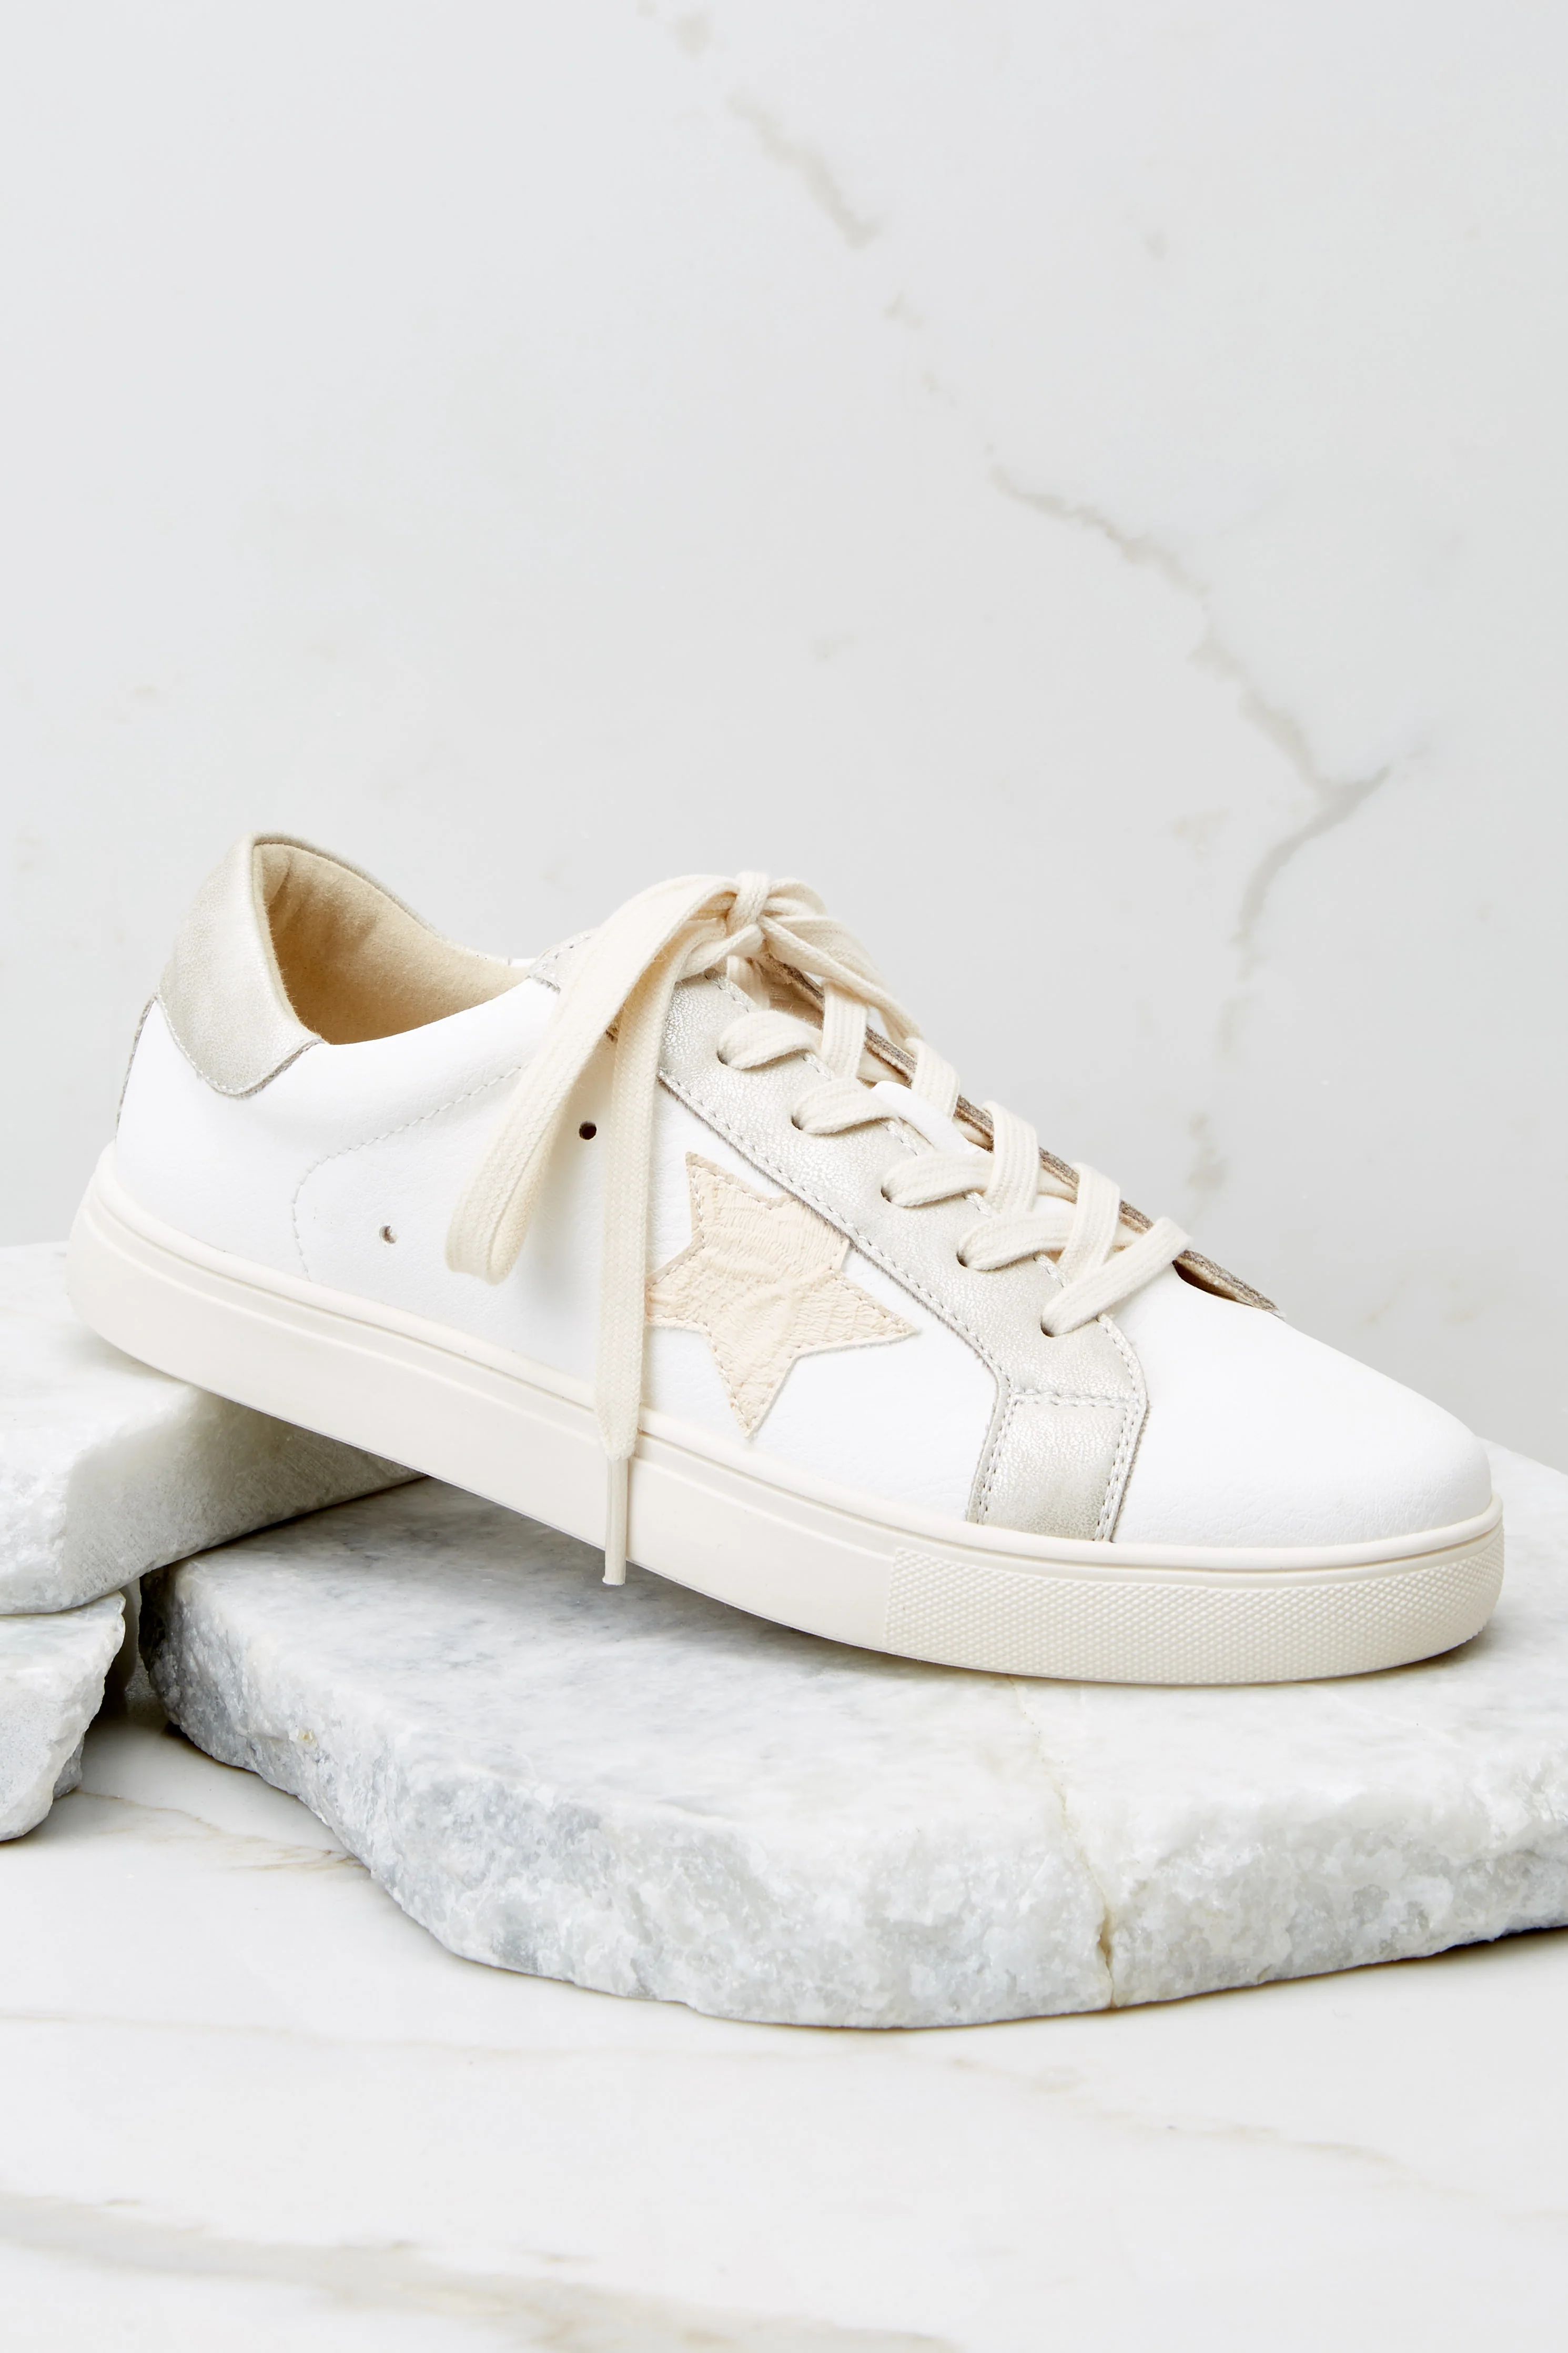 Find The Best White And Champagne Gold Sneakers | Red Dress 